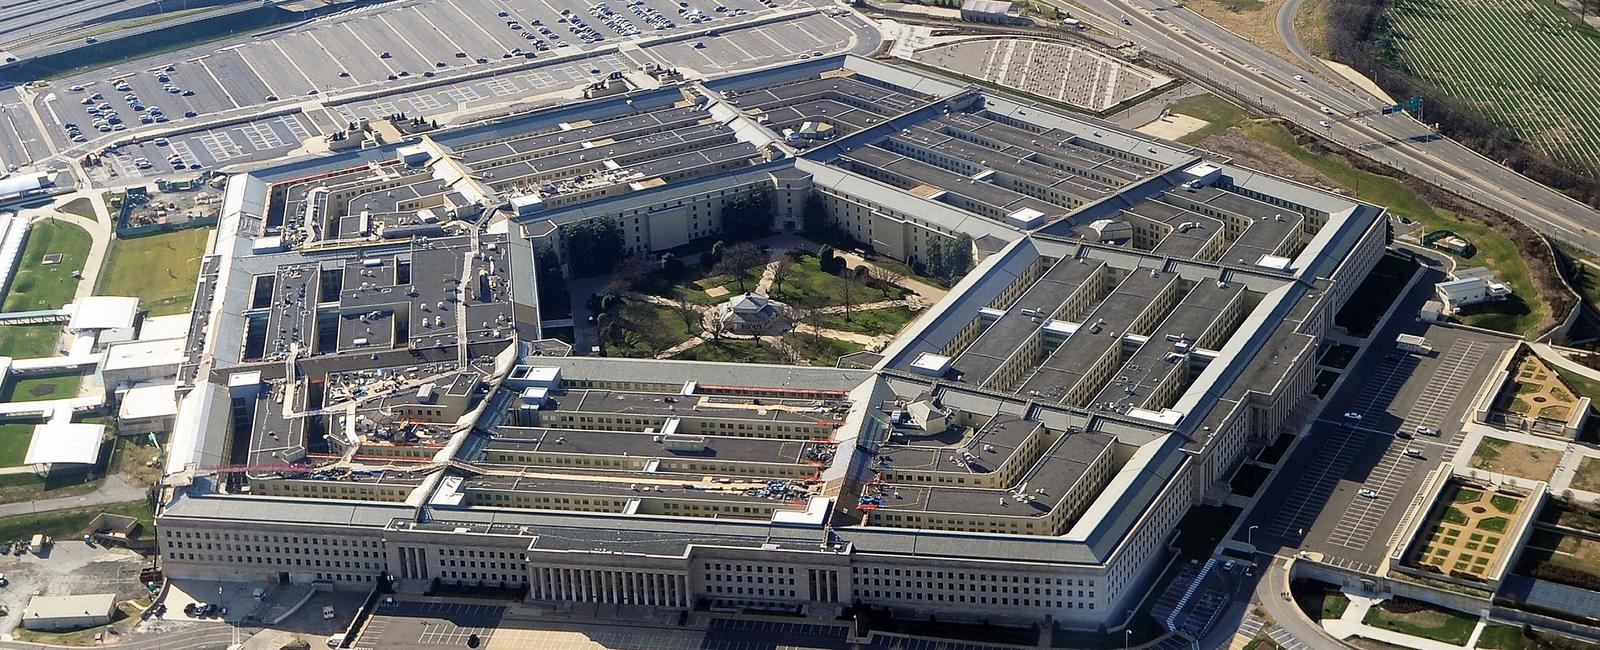 The pentagon in washington d c has five sides five stories and five acres in the middle